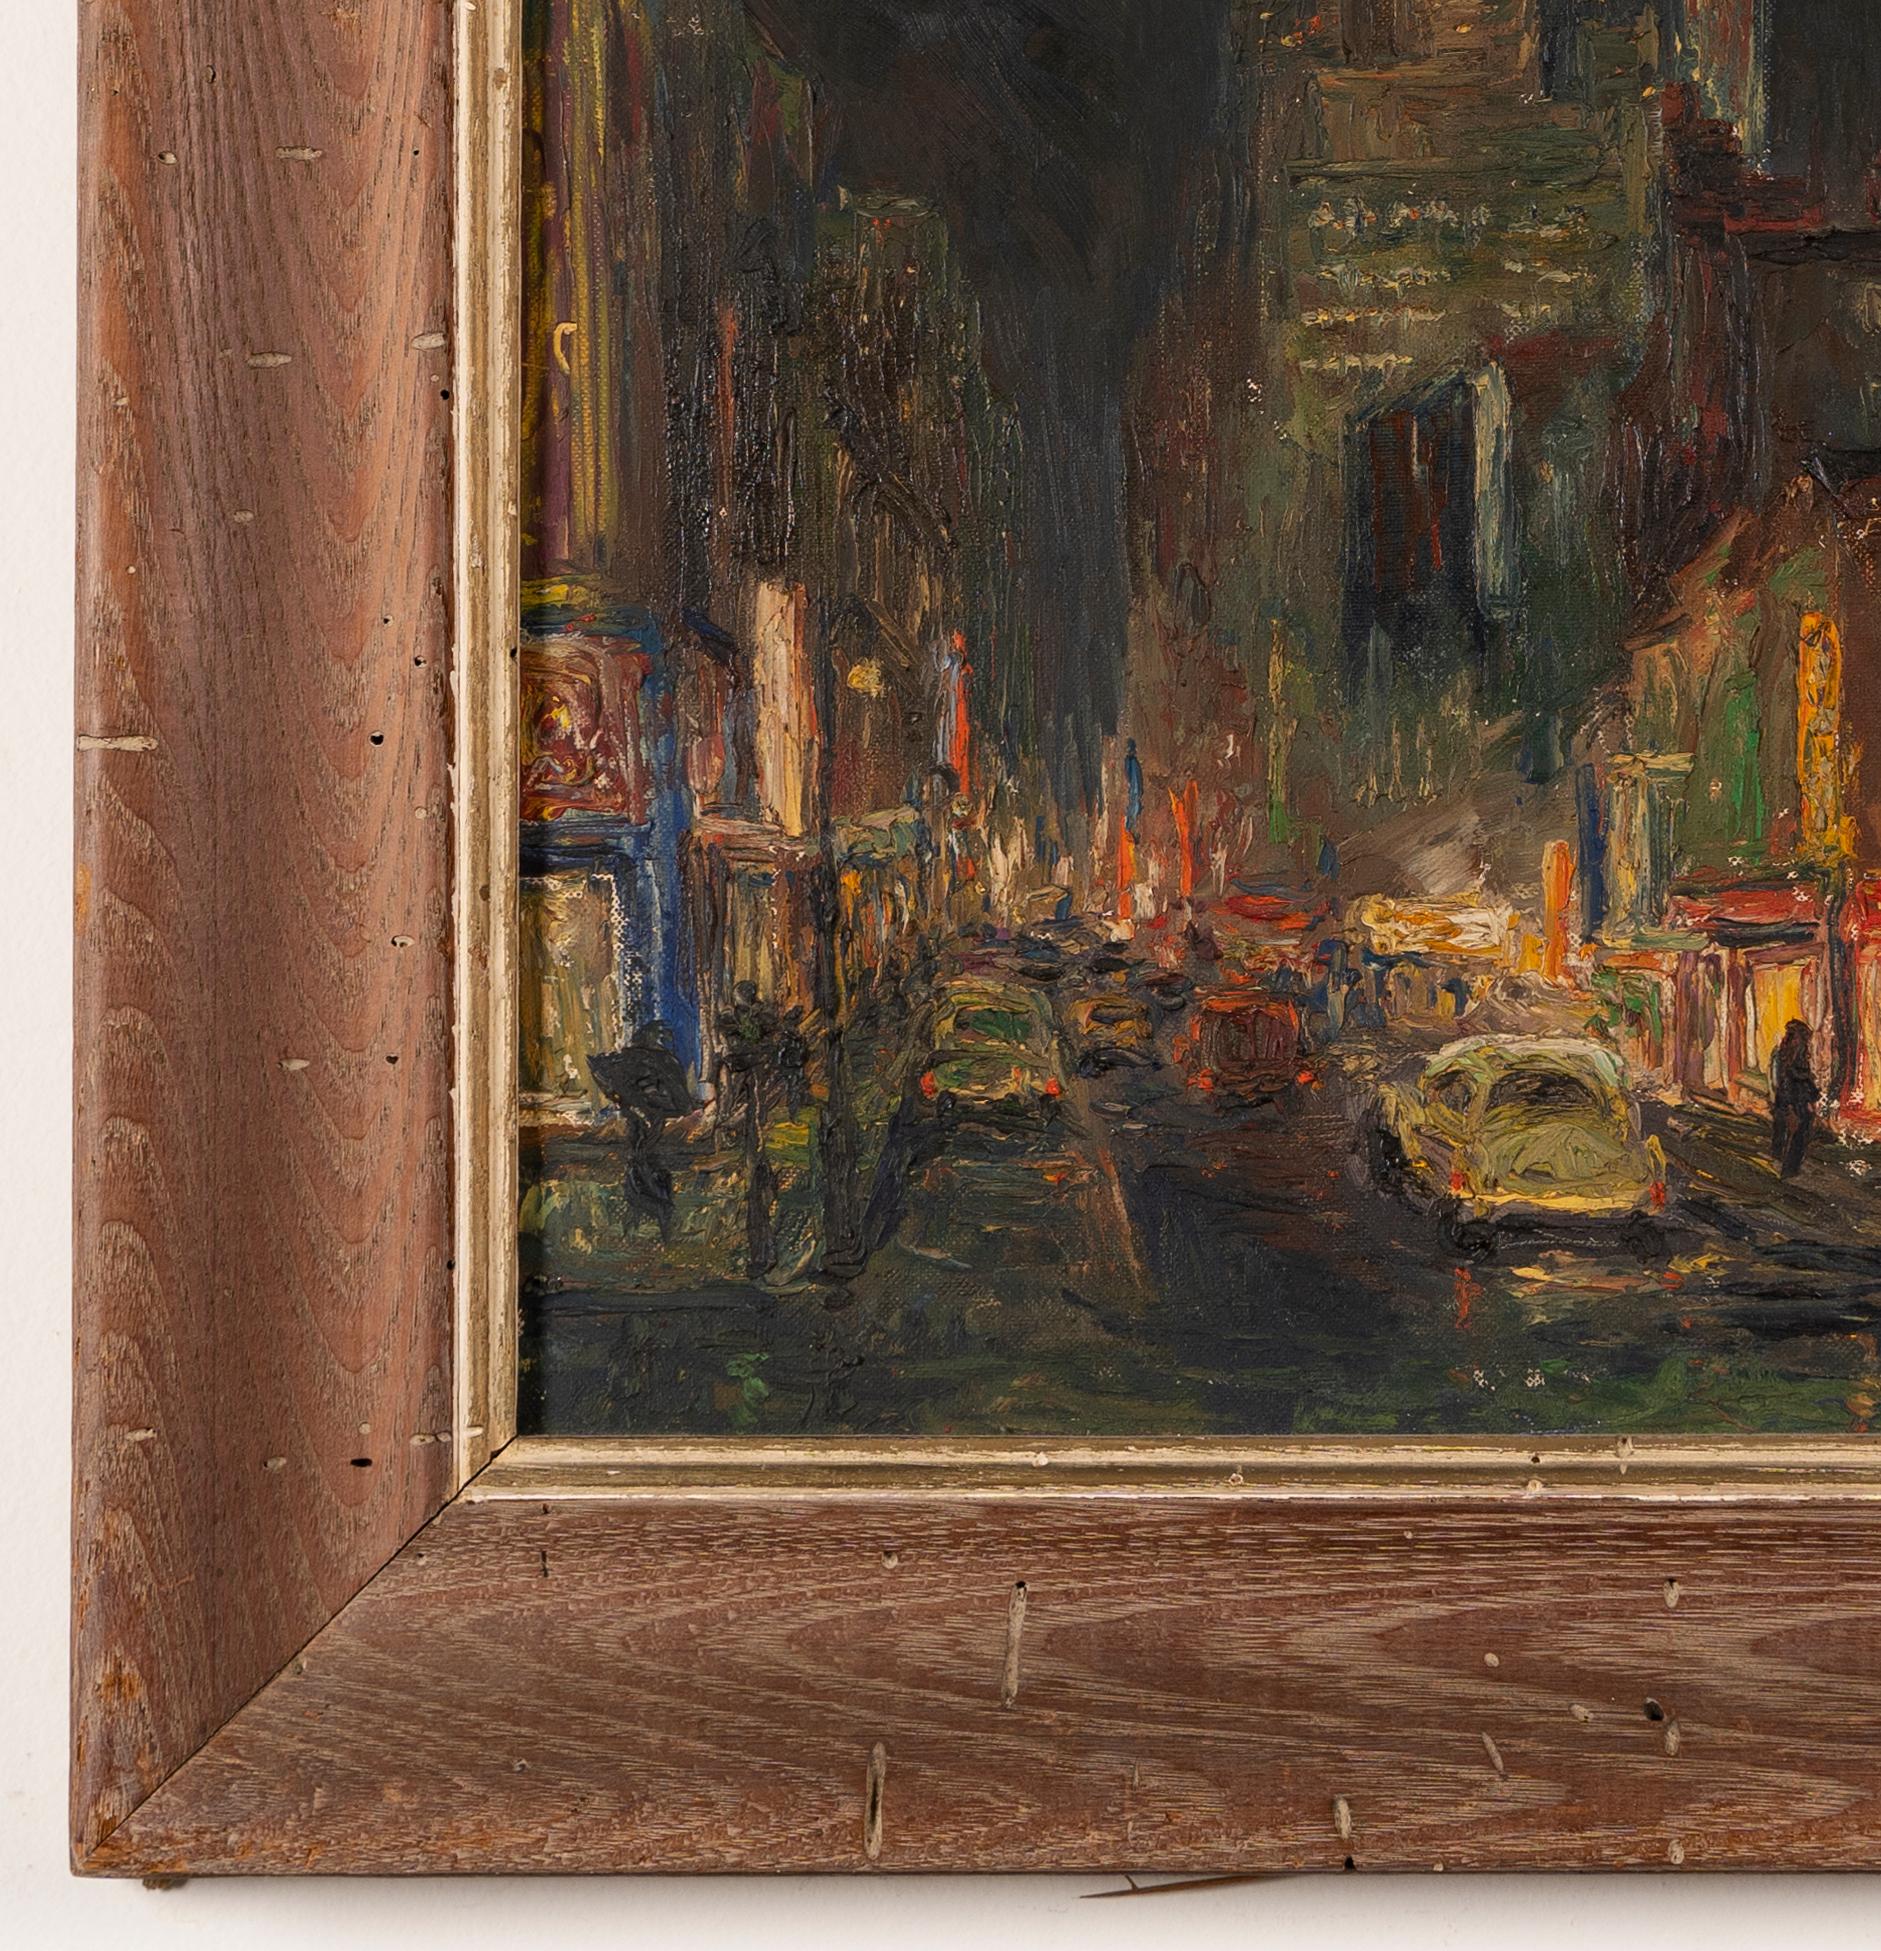 Antique original nocturnal cityscape oil painting.  Oil on board, circa 1920.  Signed illegibly.  Image size, 12L x 16H.  Housed in a period  frame.
